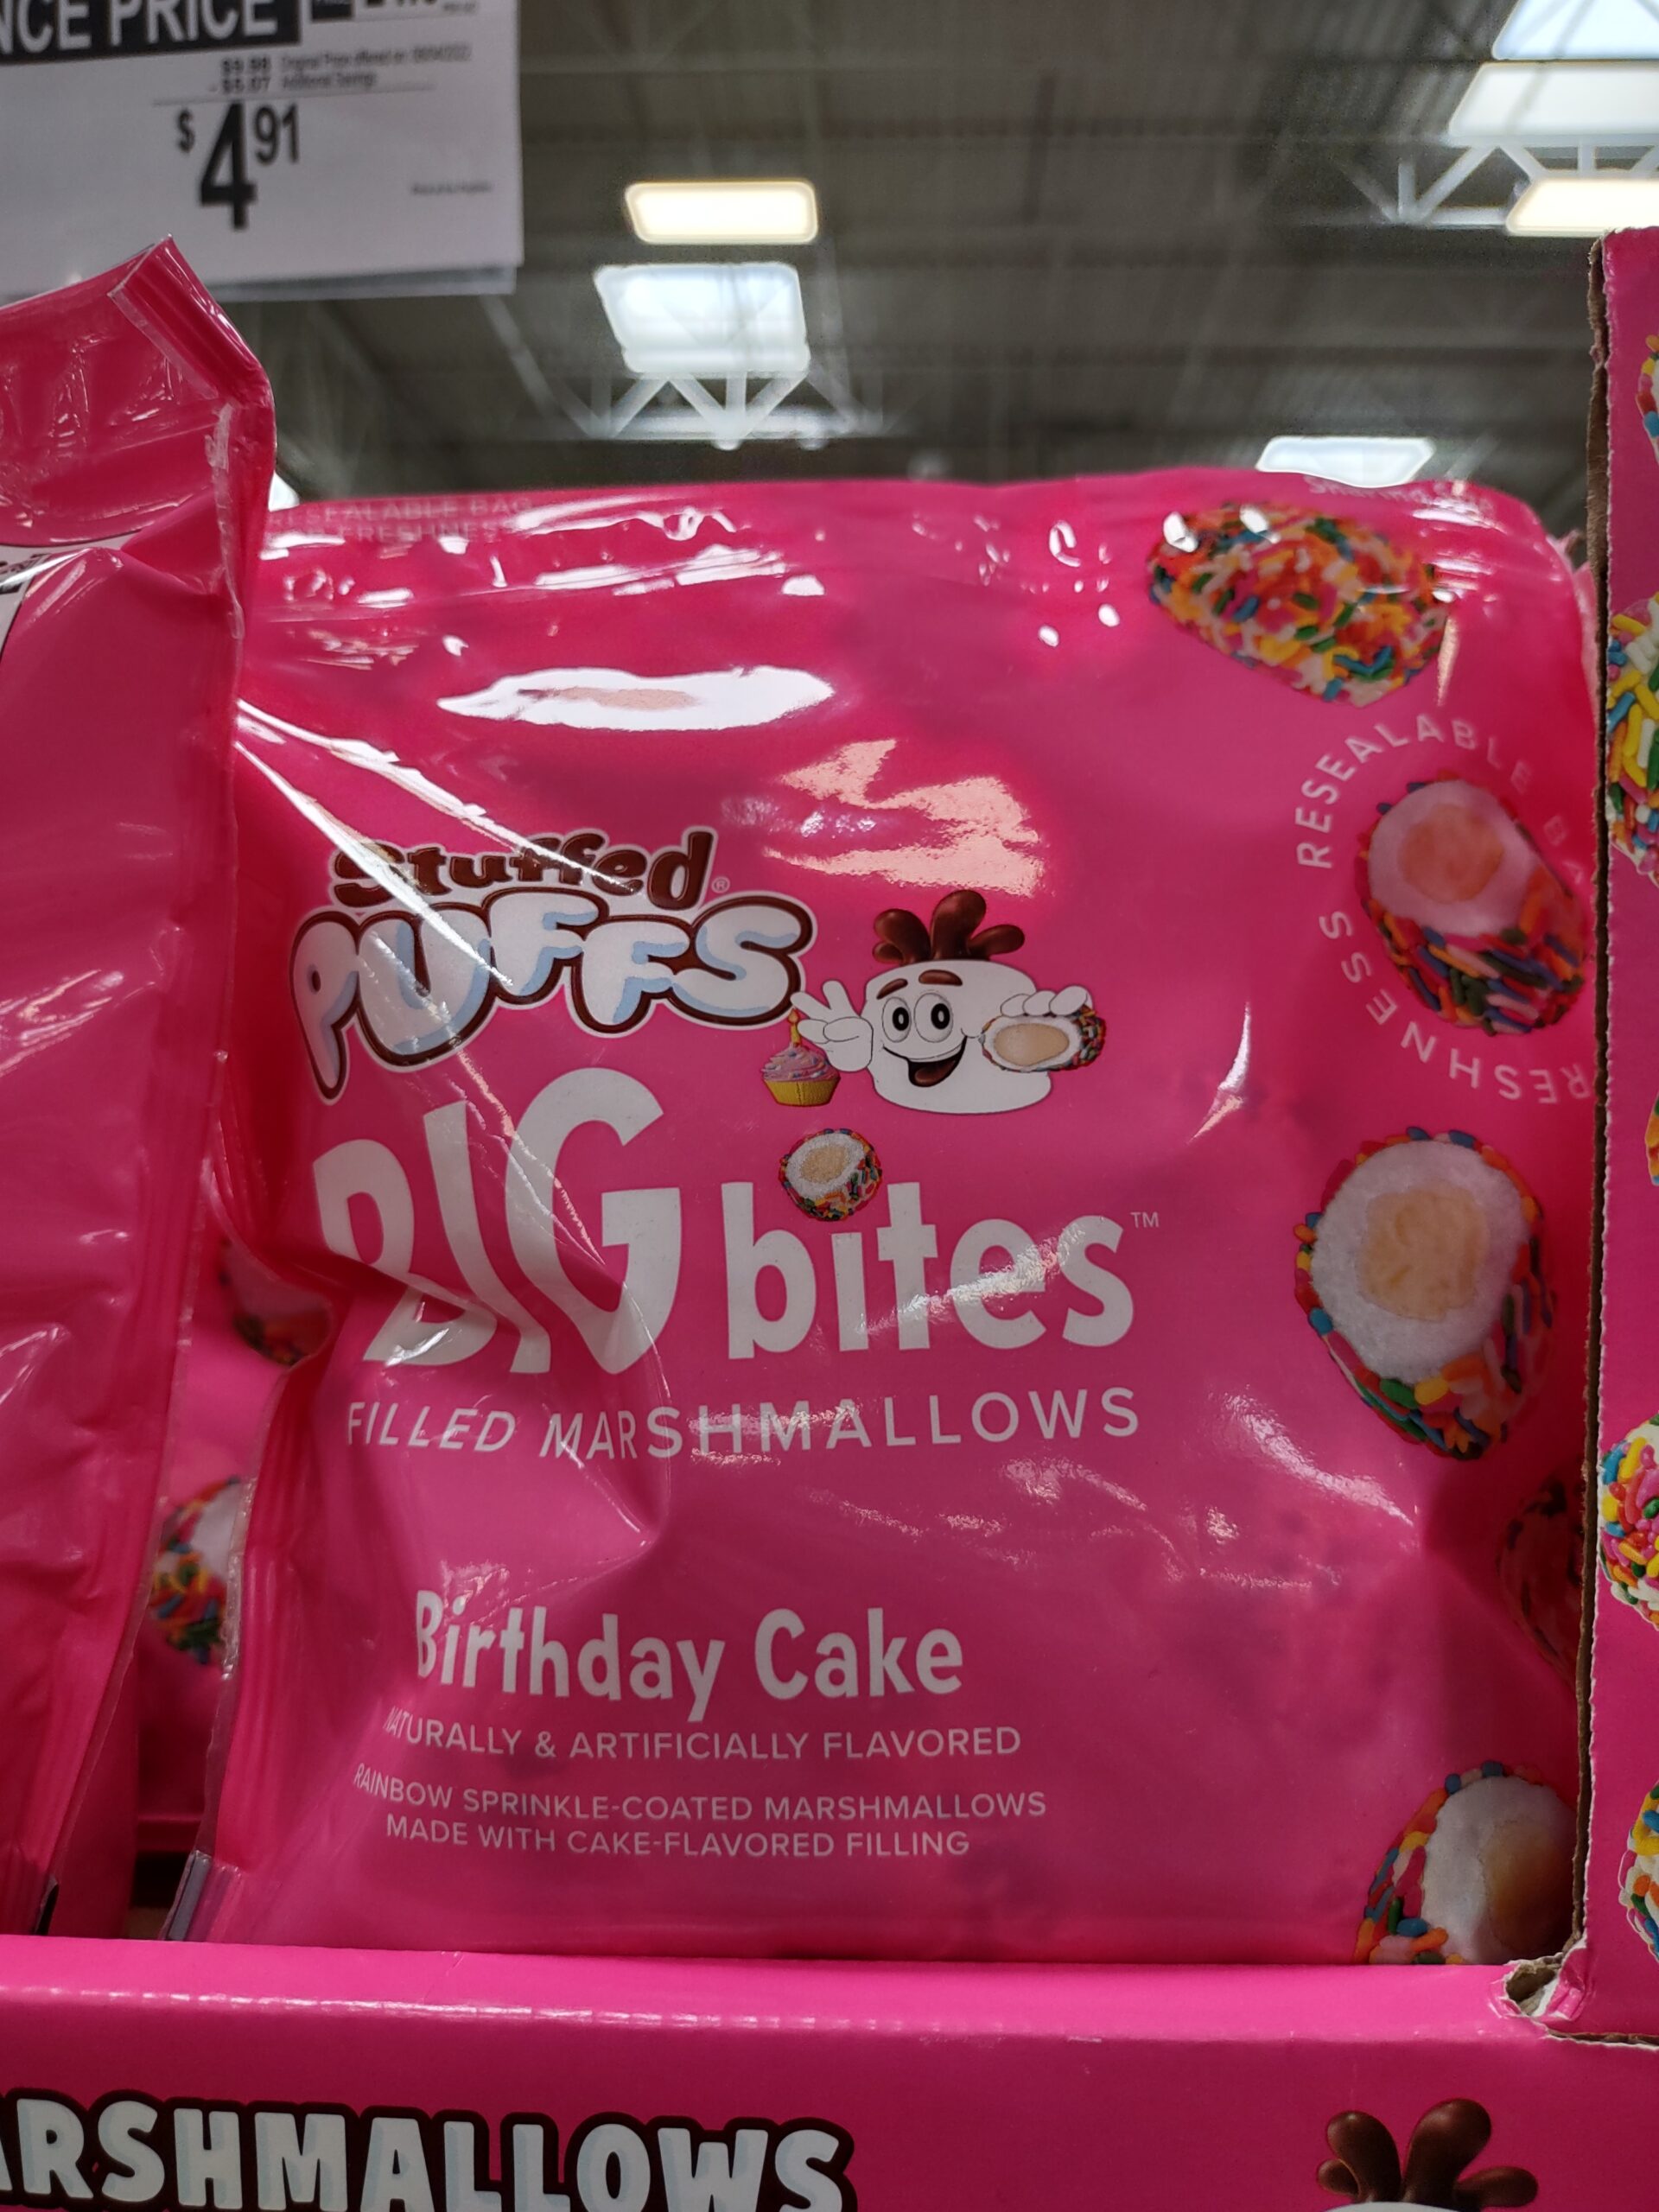 Clearance Stuffed Puffs Filled Marshmallows $2.21 at Sam’s